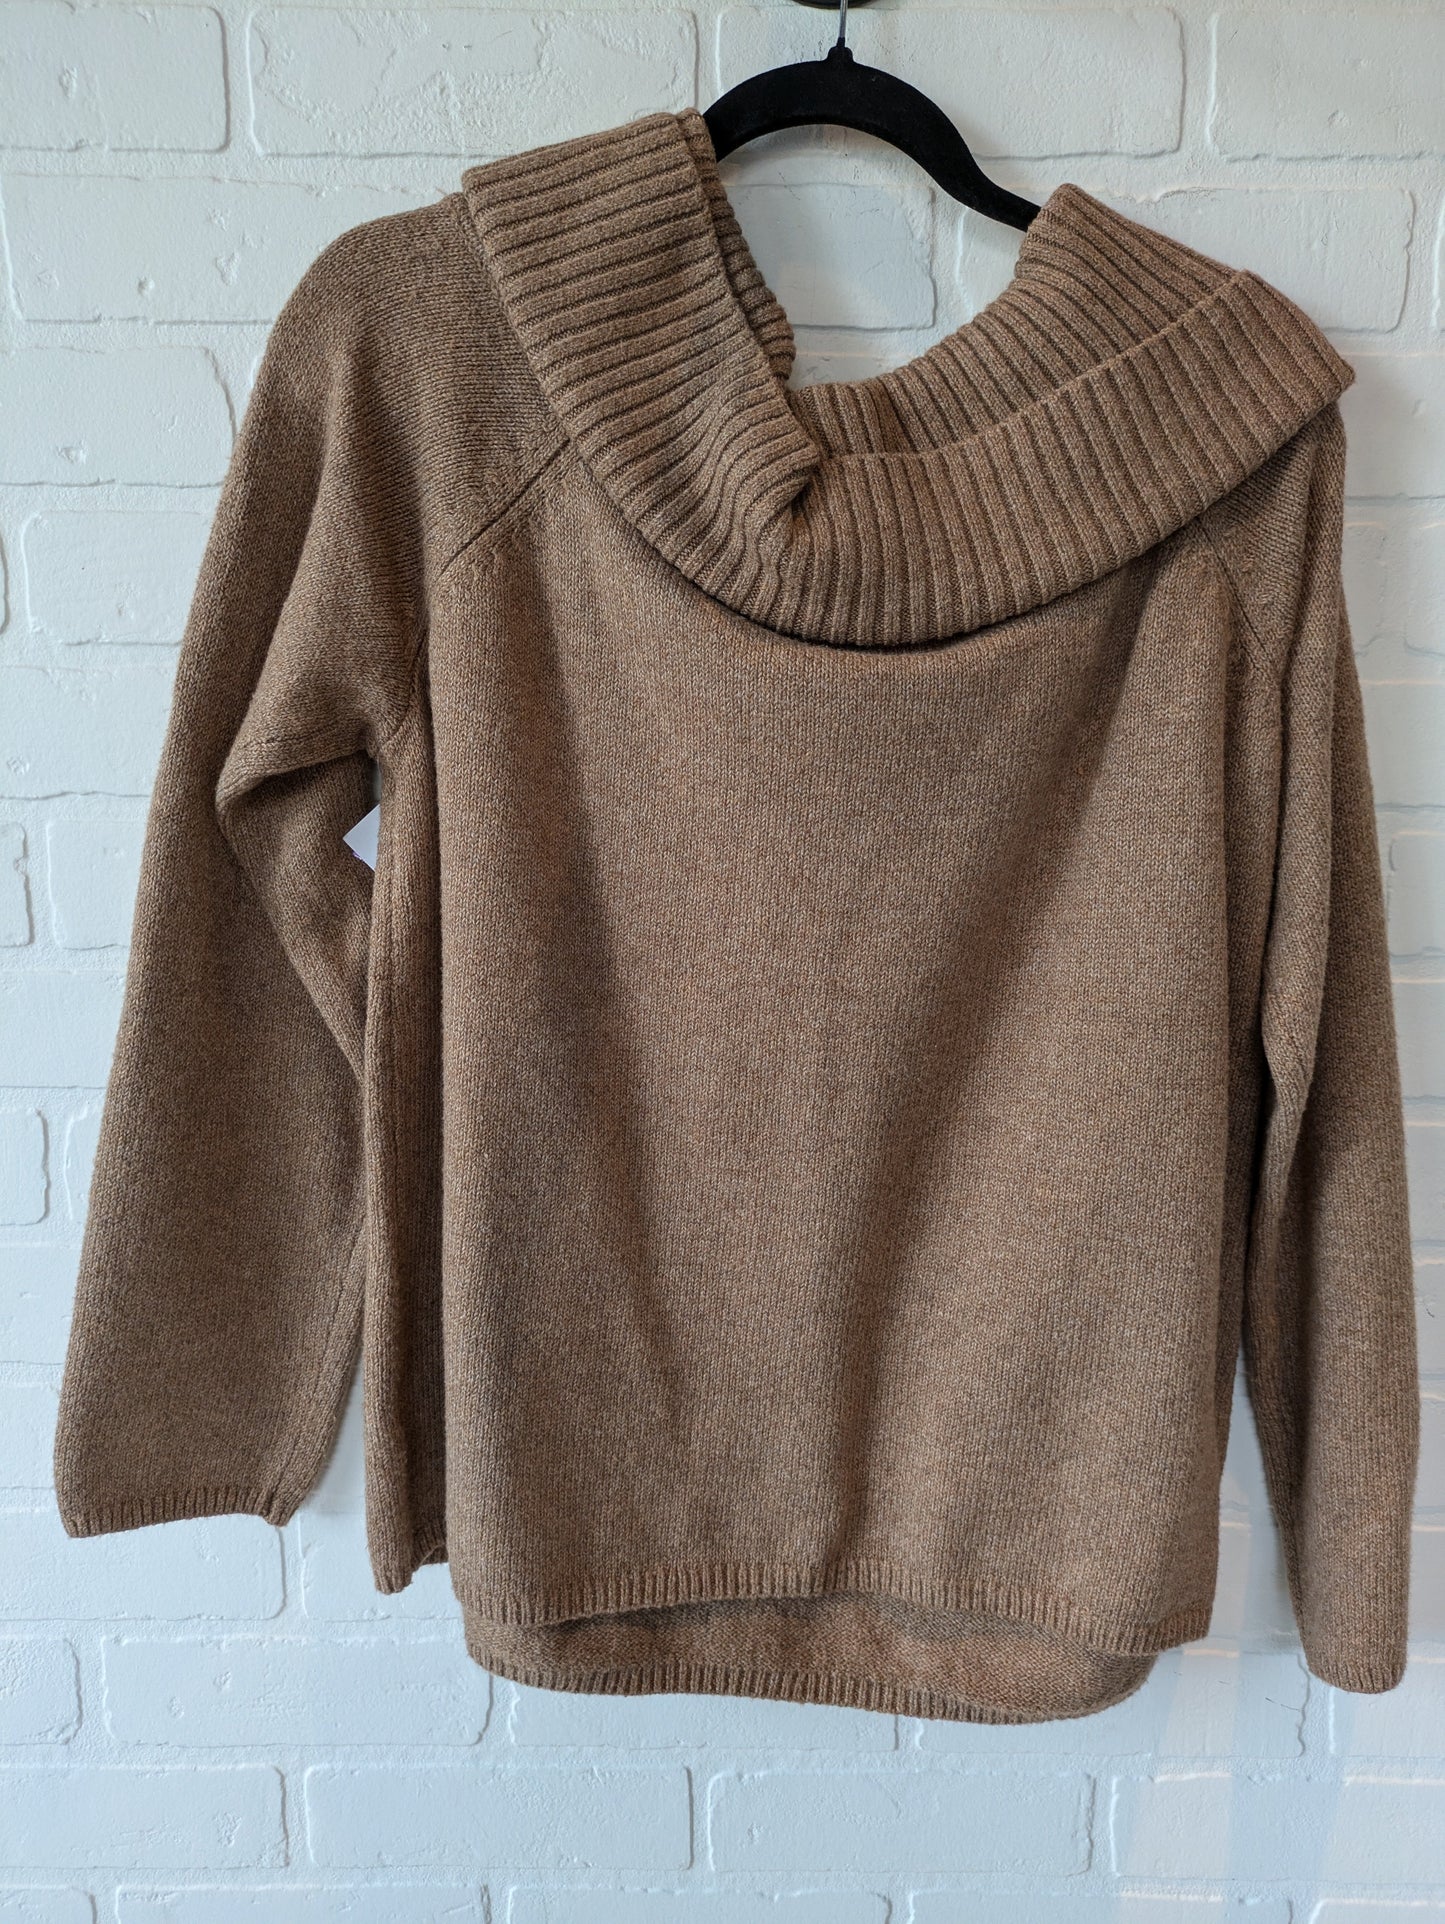 Brown Sweater Old Navy, Size 2x